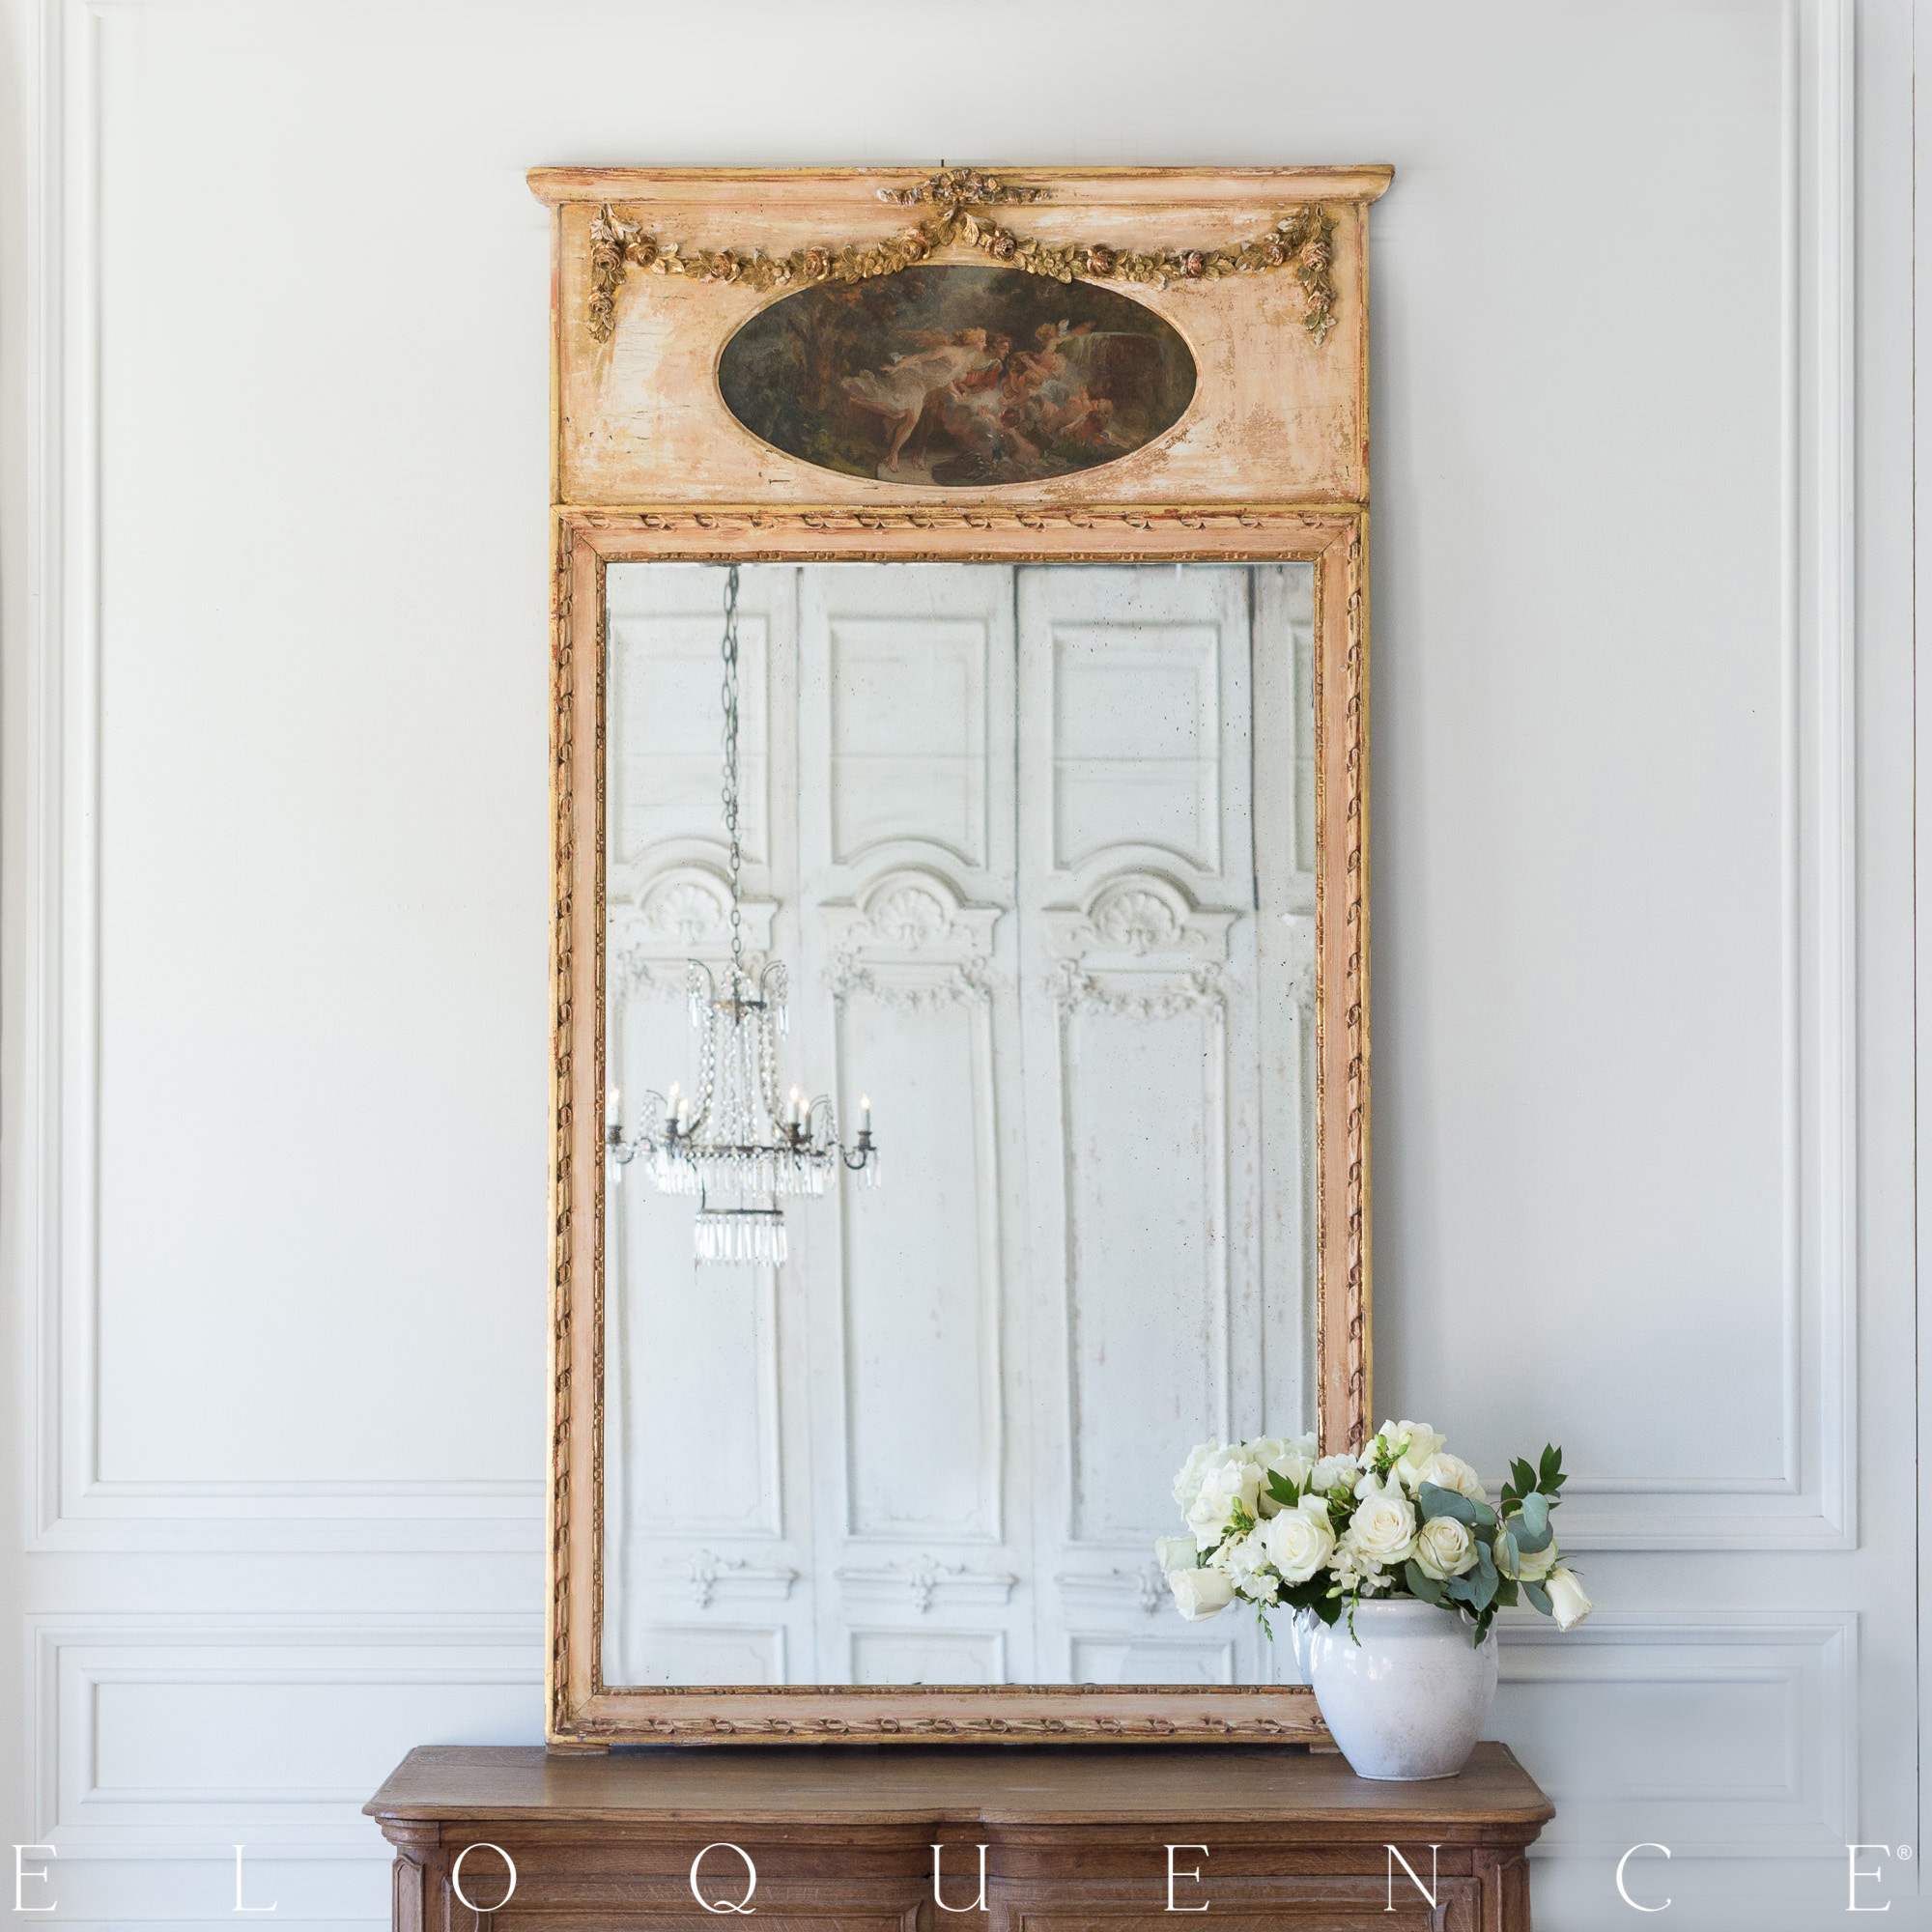 french country house furniture eloquence french country style antique Trumeau mirror: 1850 PCMMHGJ